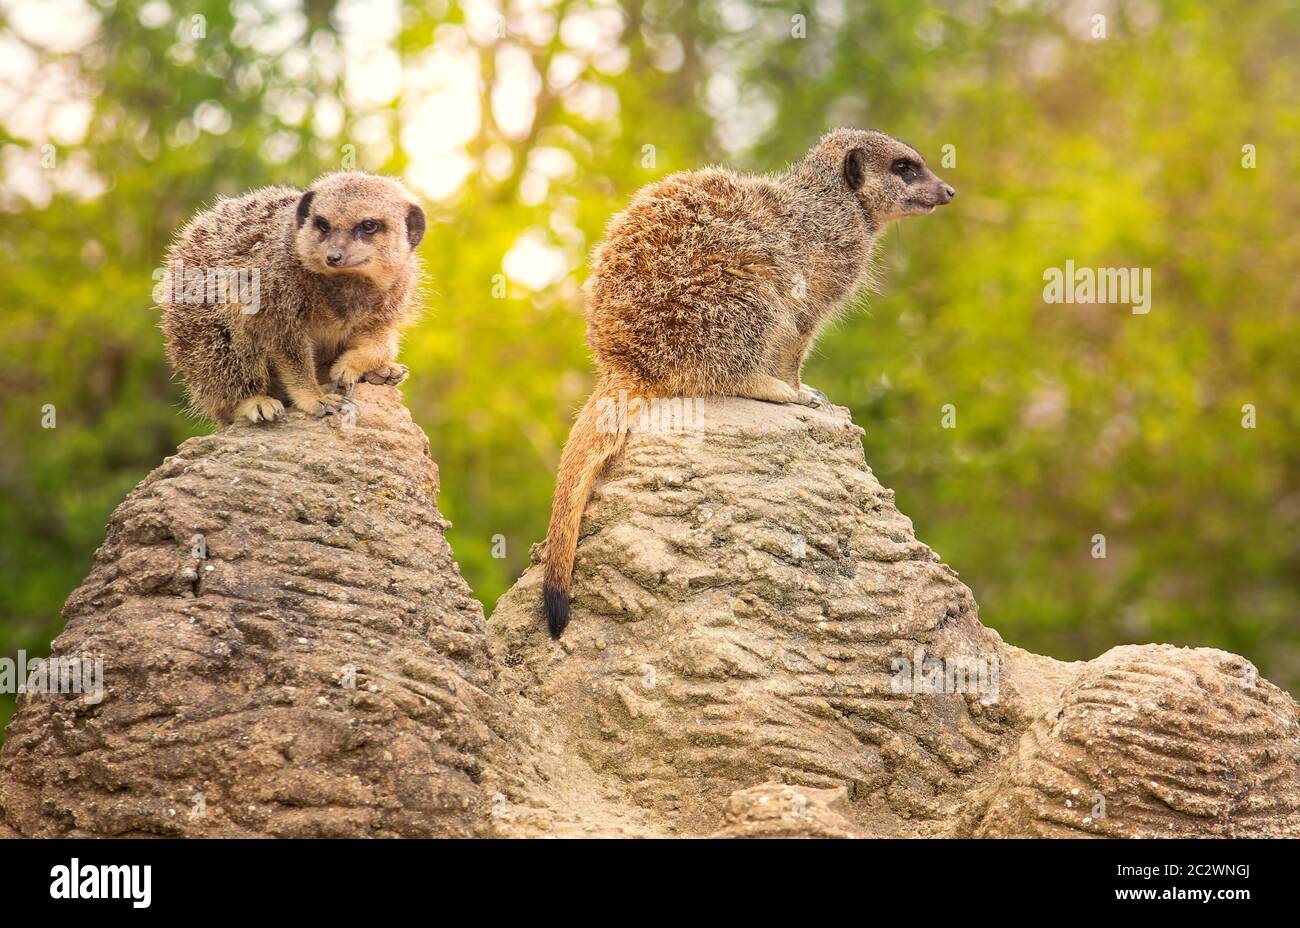 Two Cute Meerkats On The Lookout In The Zoo Stock Photo Alamy